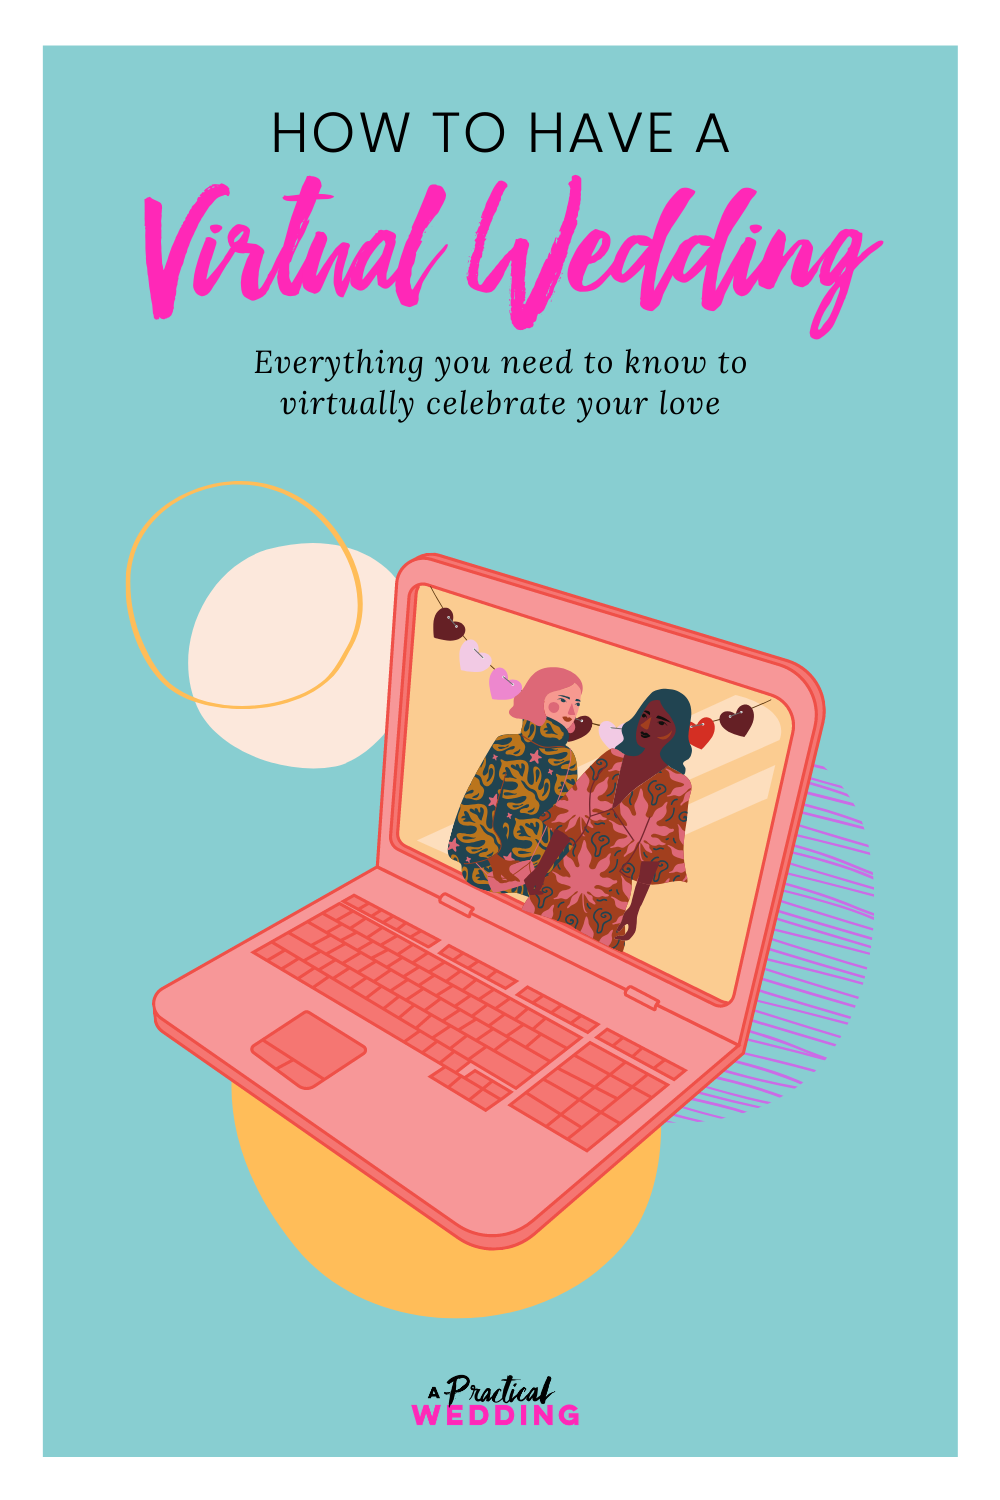 How to have a virtual wedding, graphic of a laptop and two brides